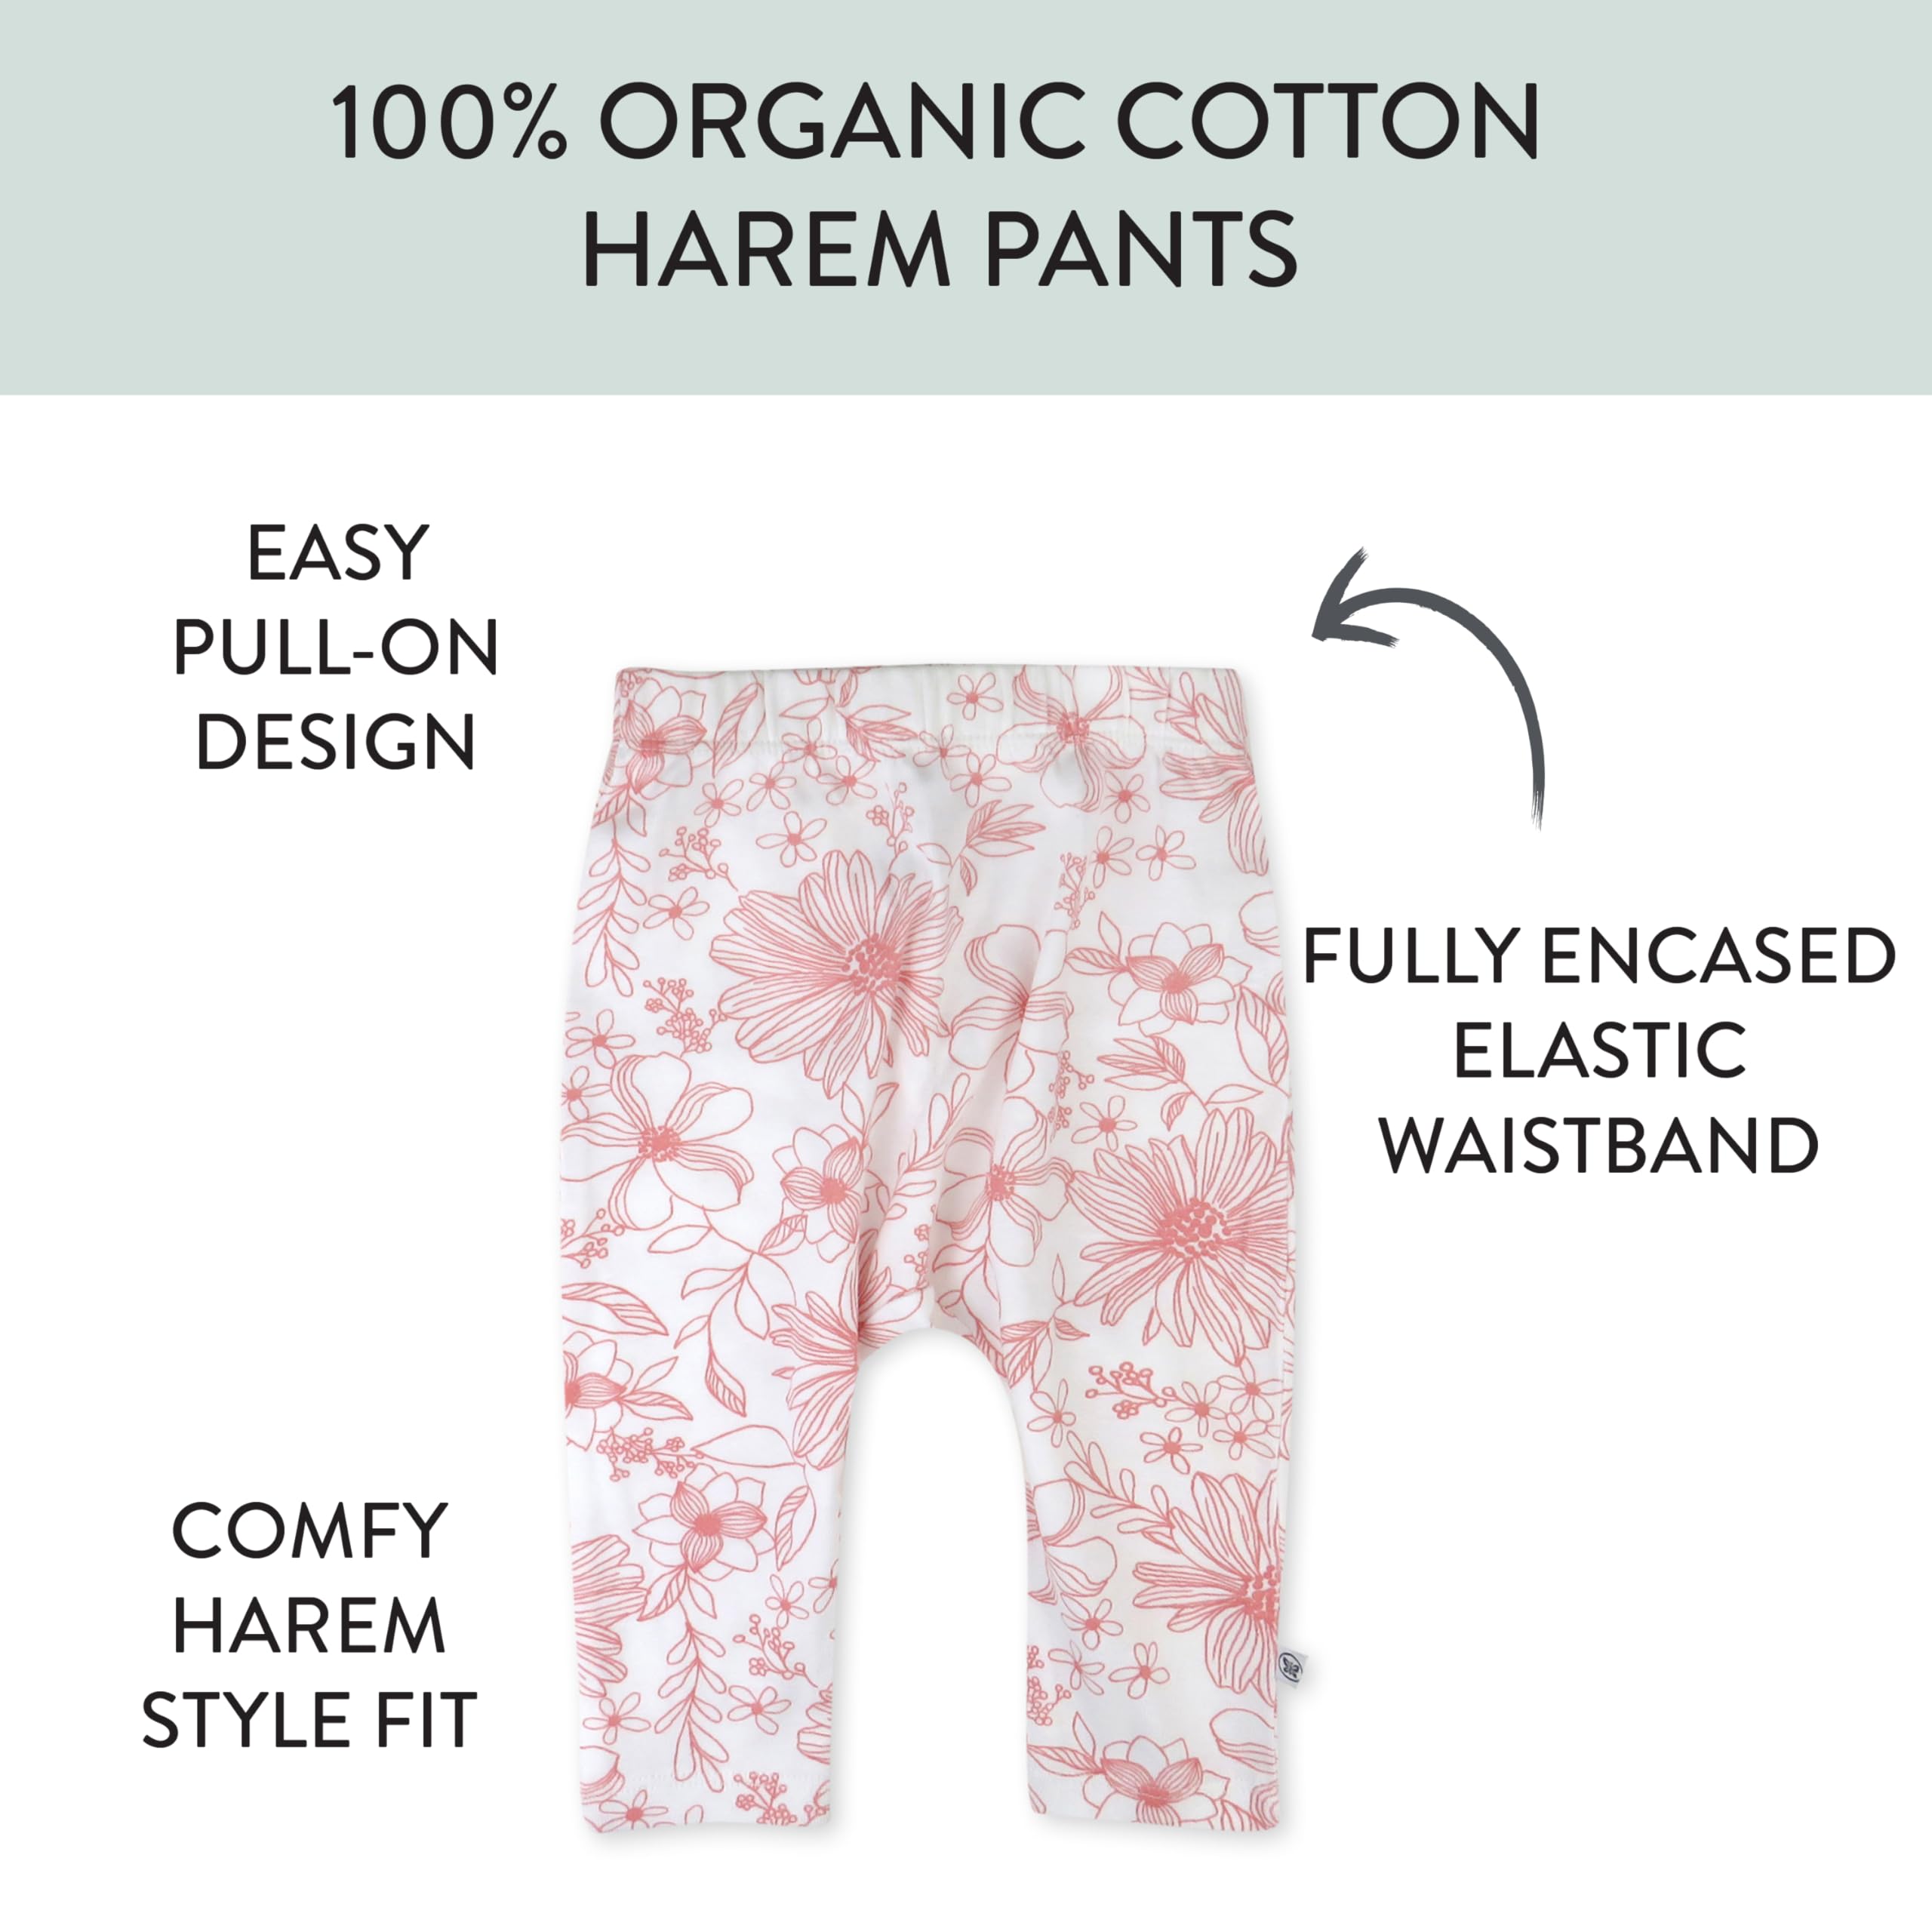 HonestBaby Multipack Harem Pants Roomy Fit Pull on Bottoms 100% Organic Cotton for Infant Baby Boys, Girls, Unisex